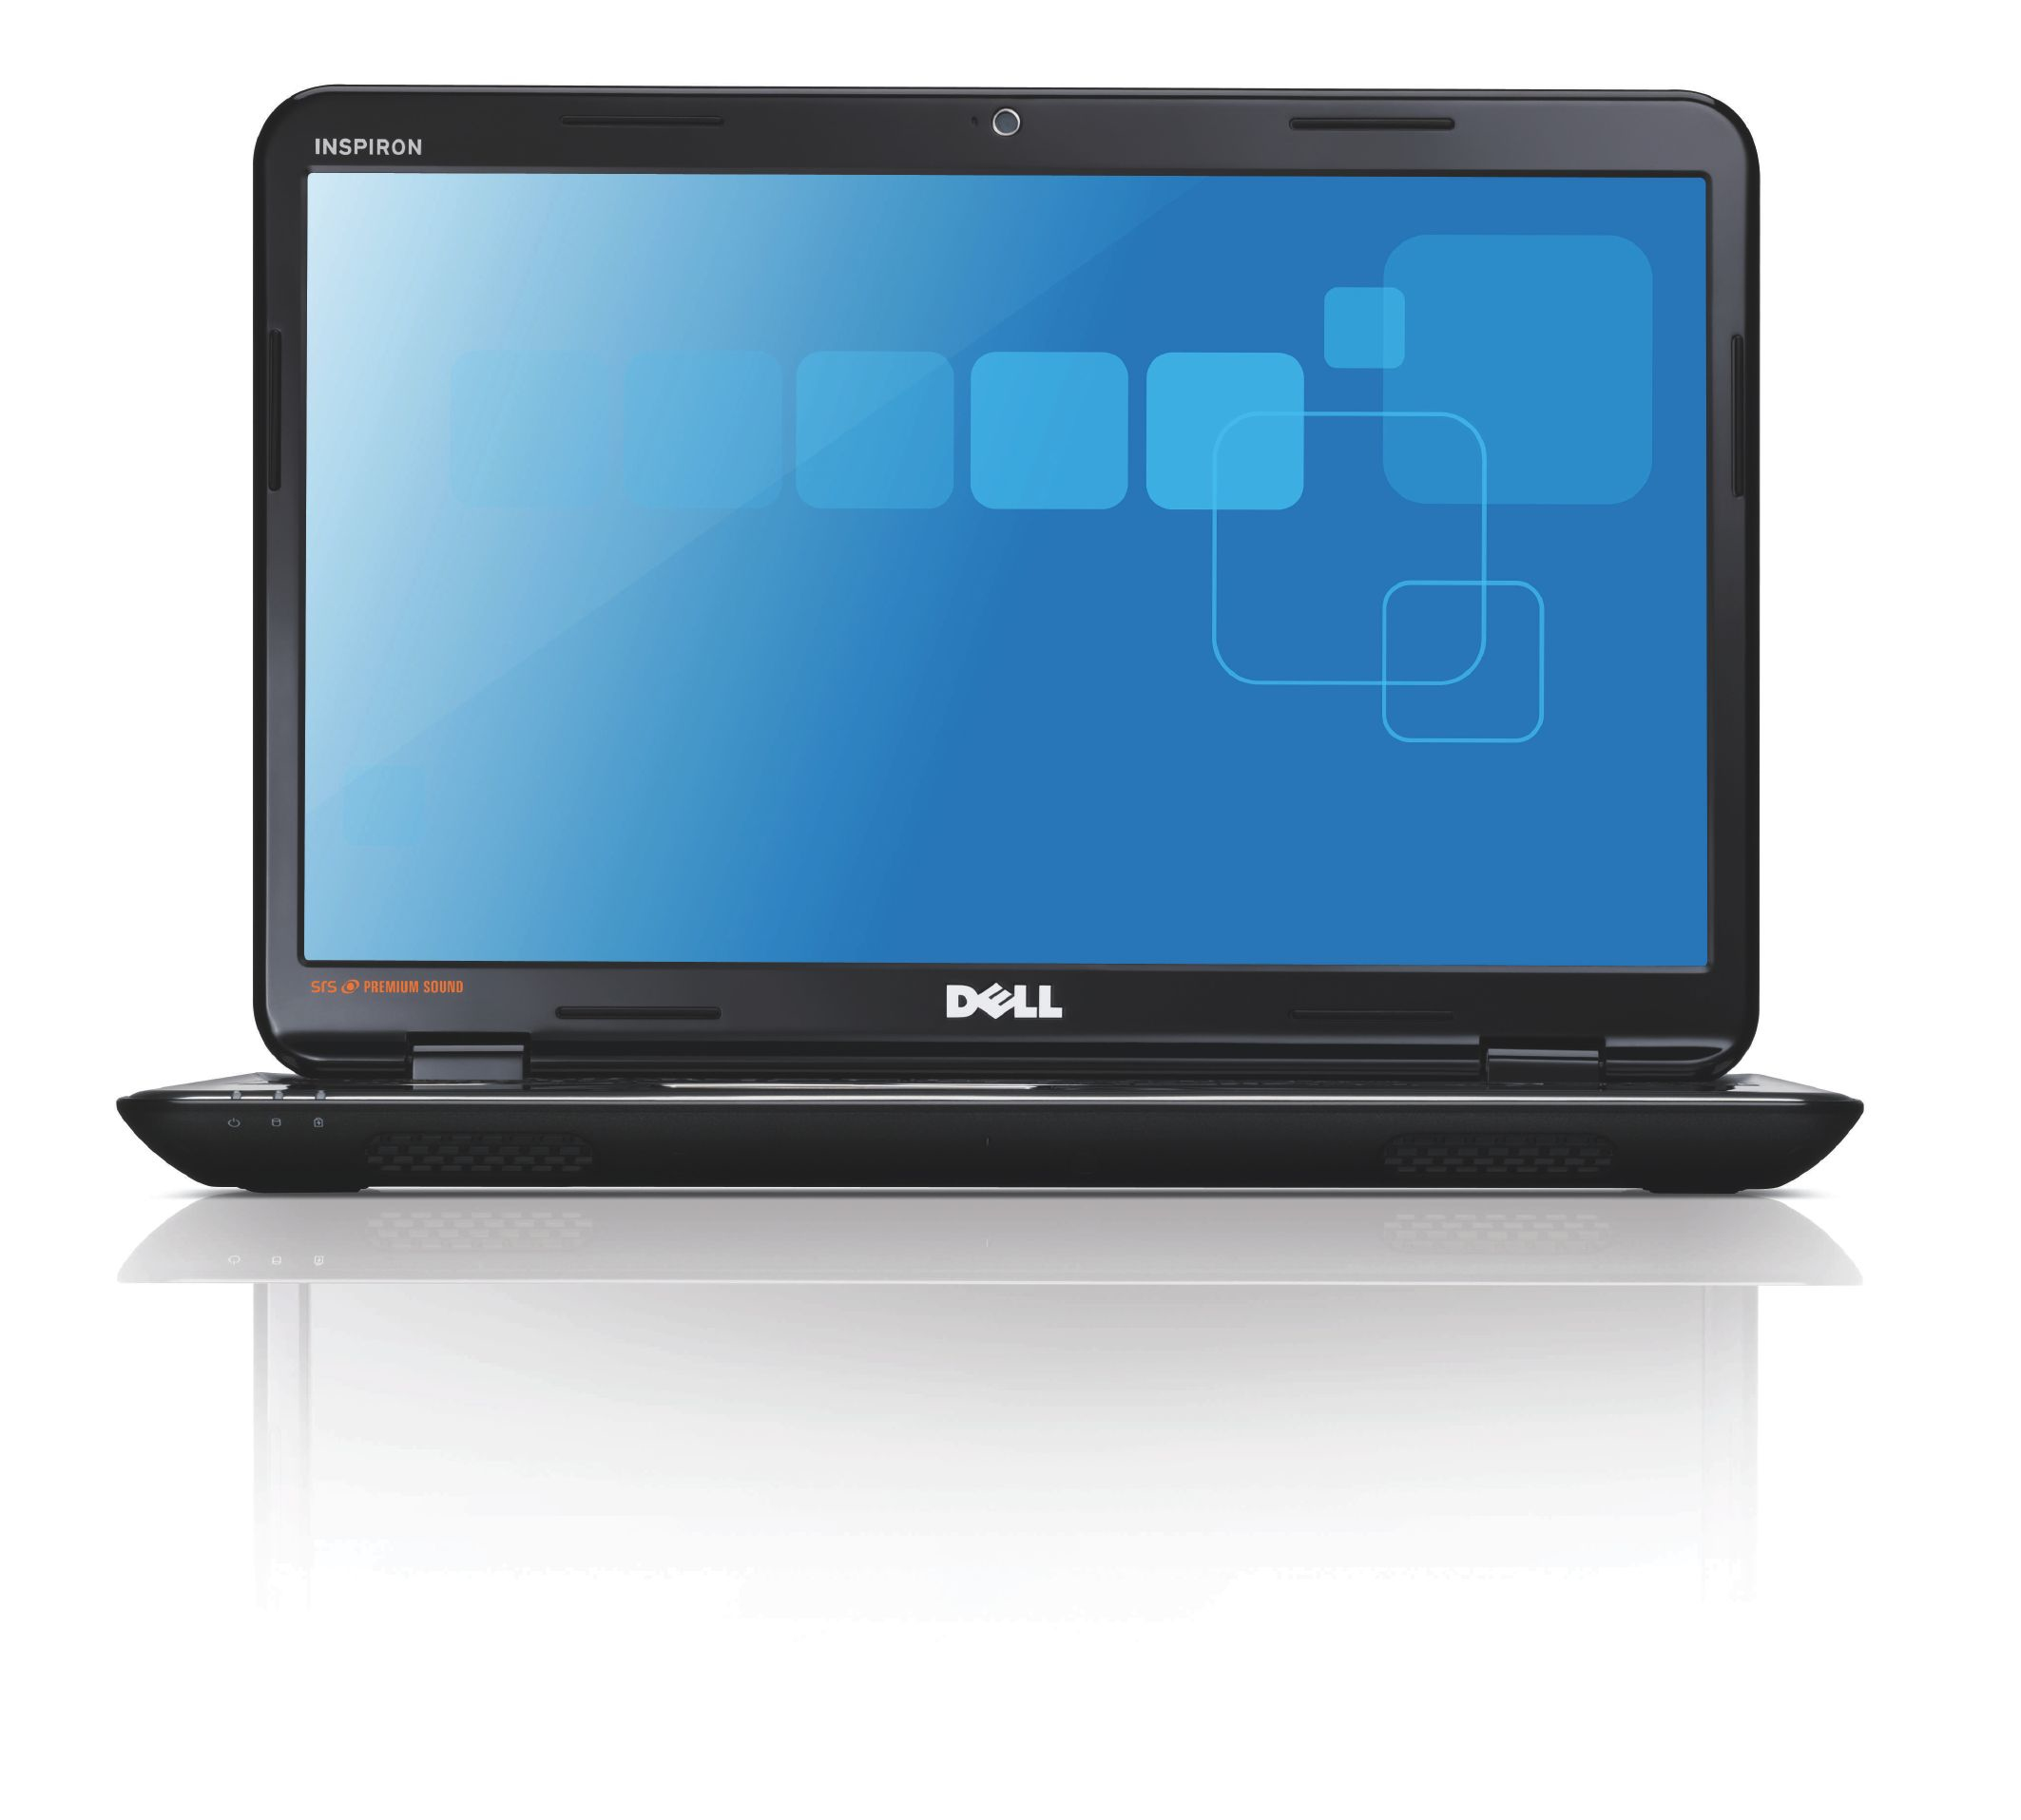 dell inspiron n5110 all drivers for windows 7 64 bit